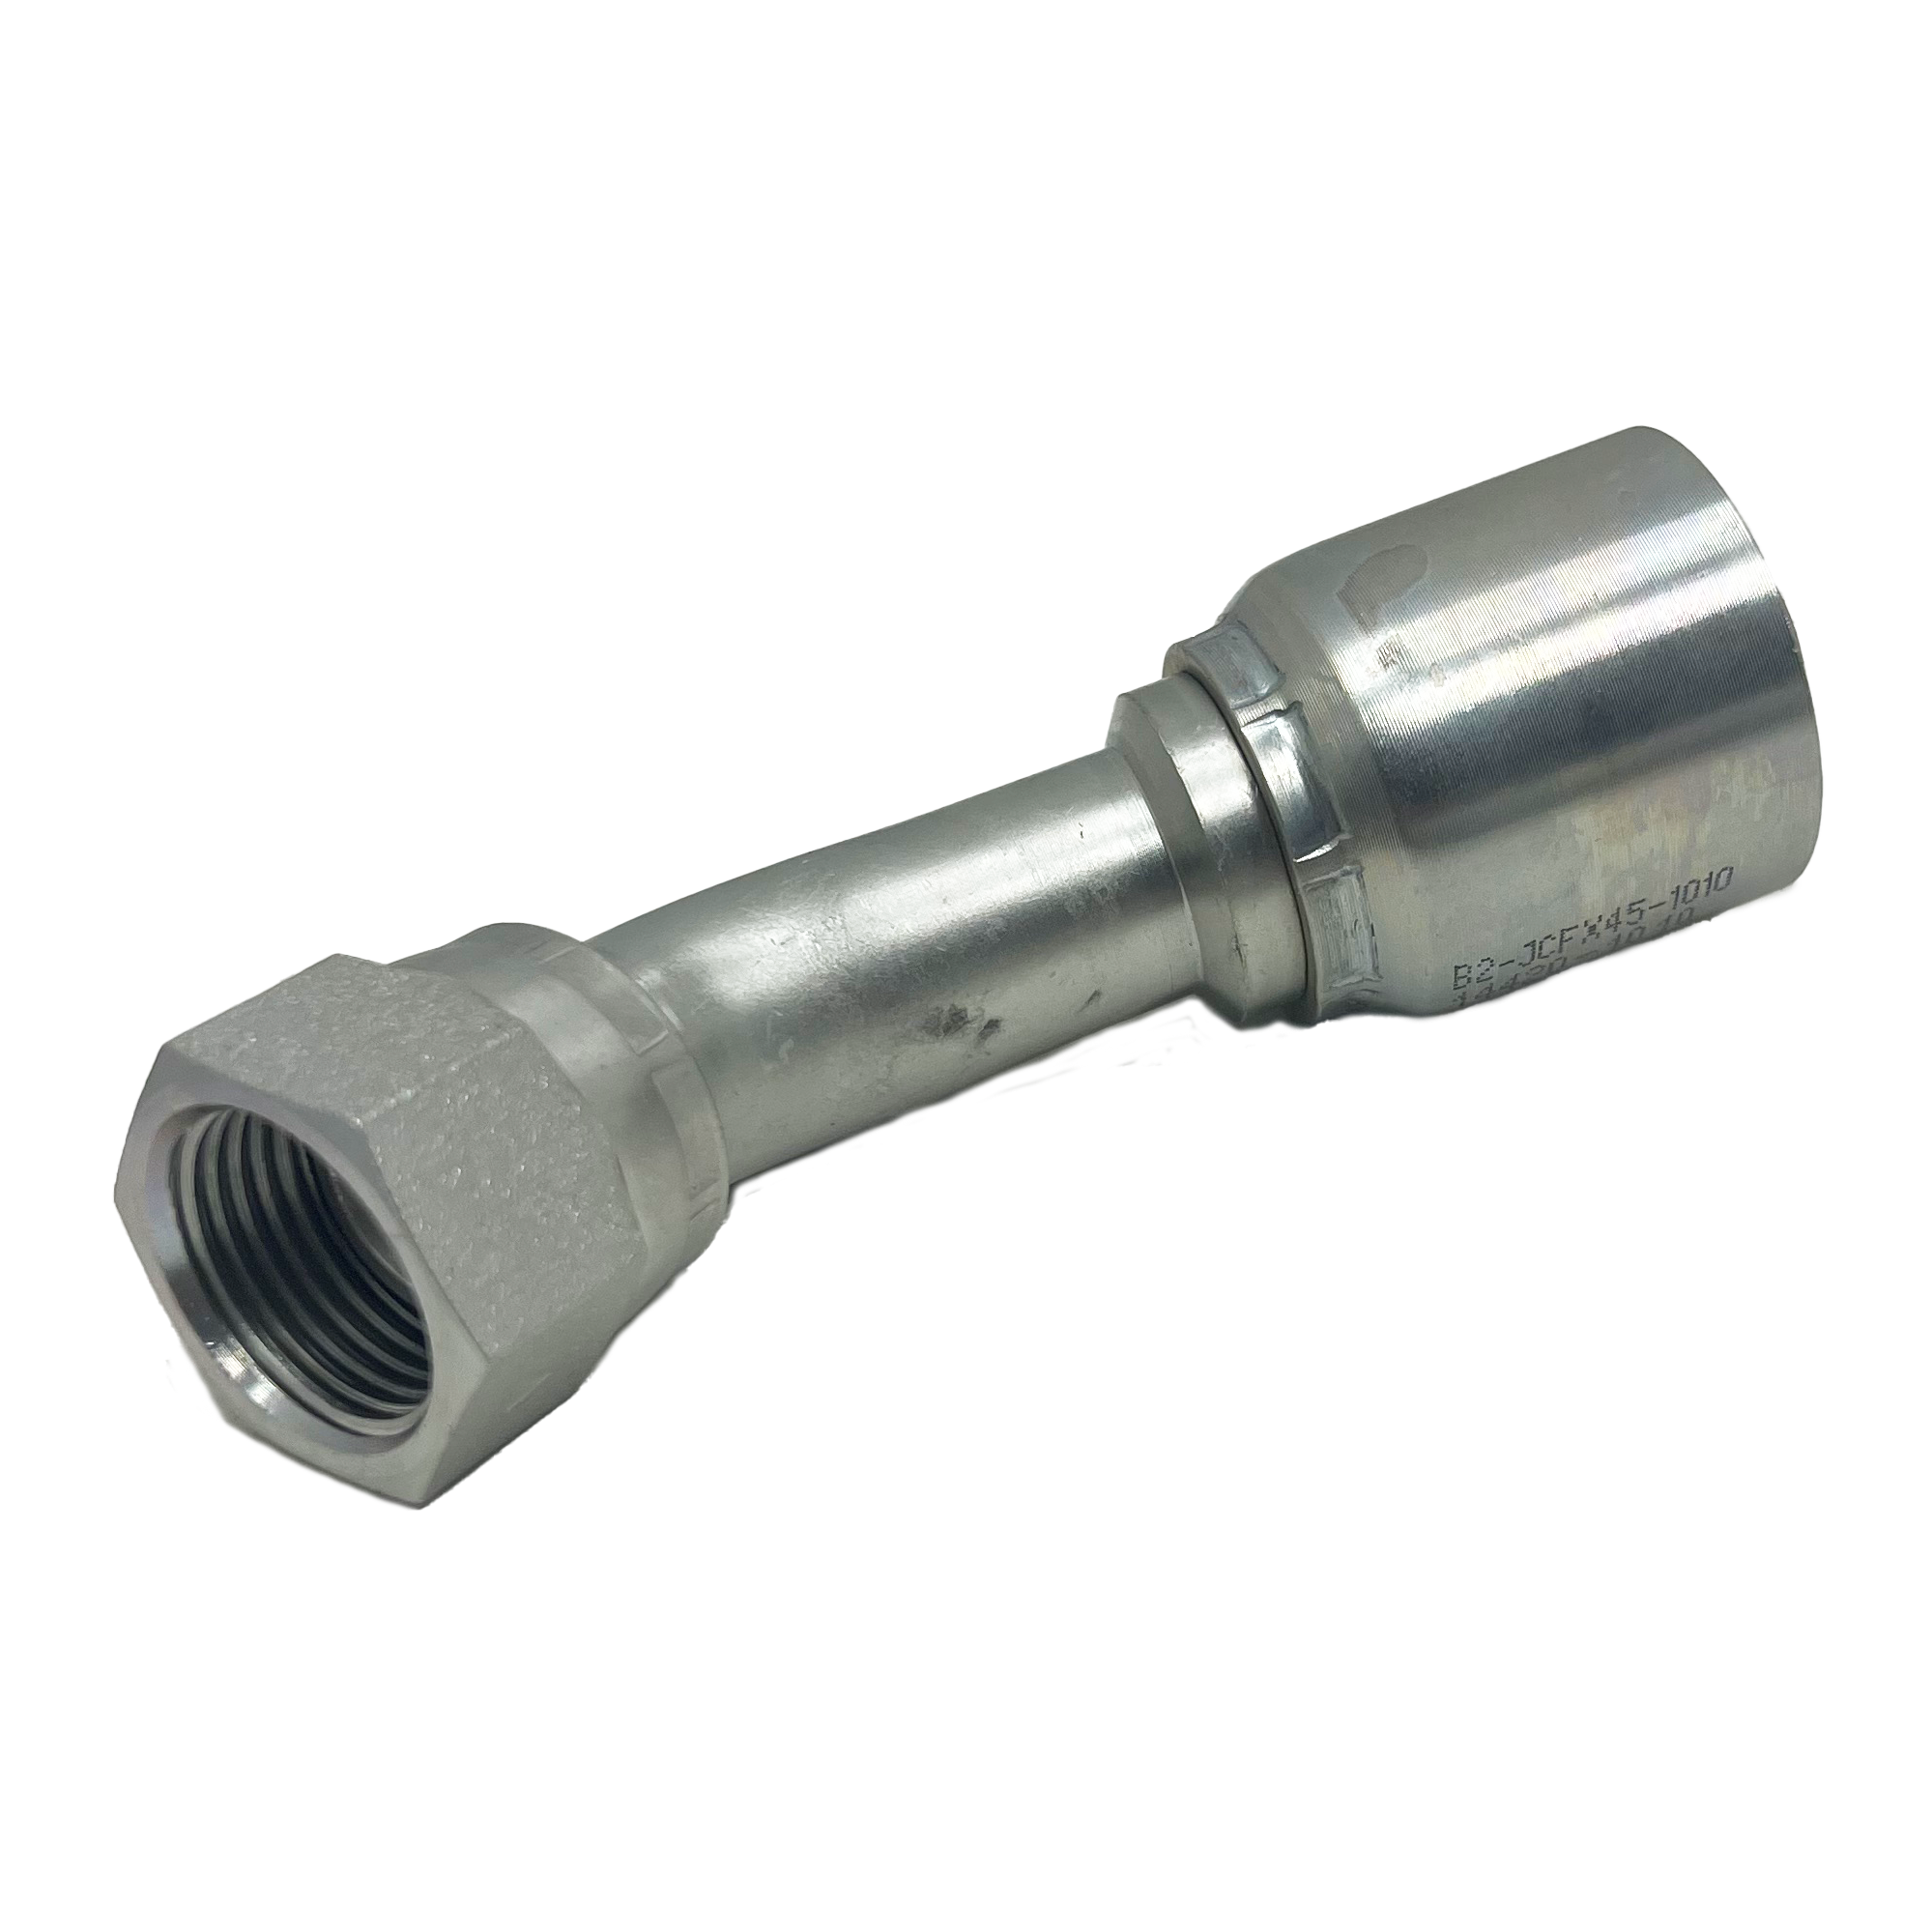 B2-JCFX45-1212: Continental Hose Fitting, 0.75 (3/4") Hose ID x 1-1/16-12           Female JIC, 45-Degree Swivel Connection